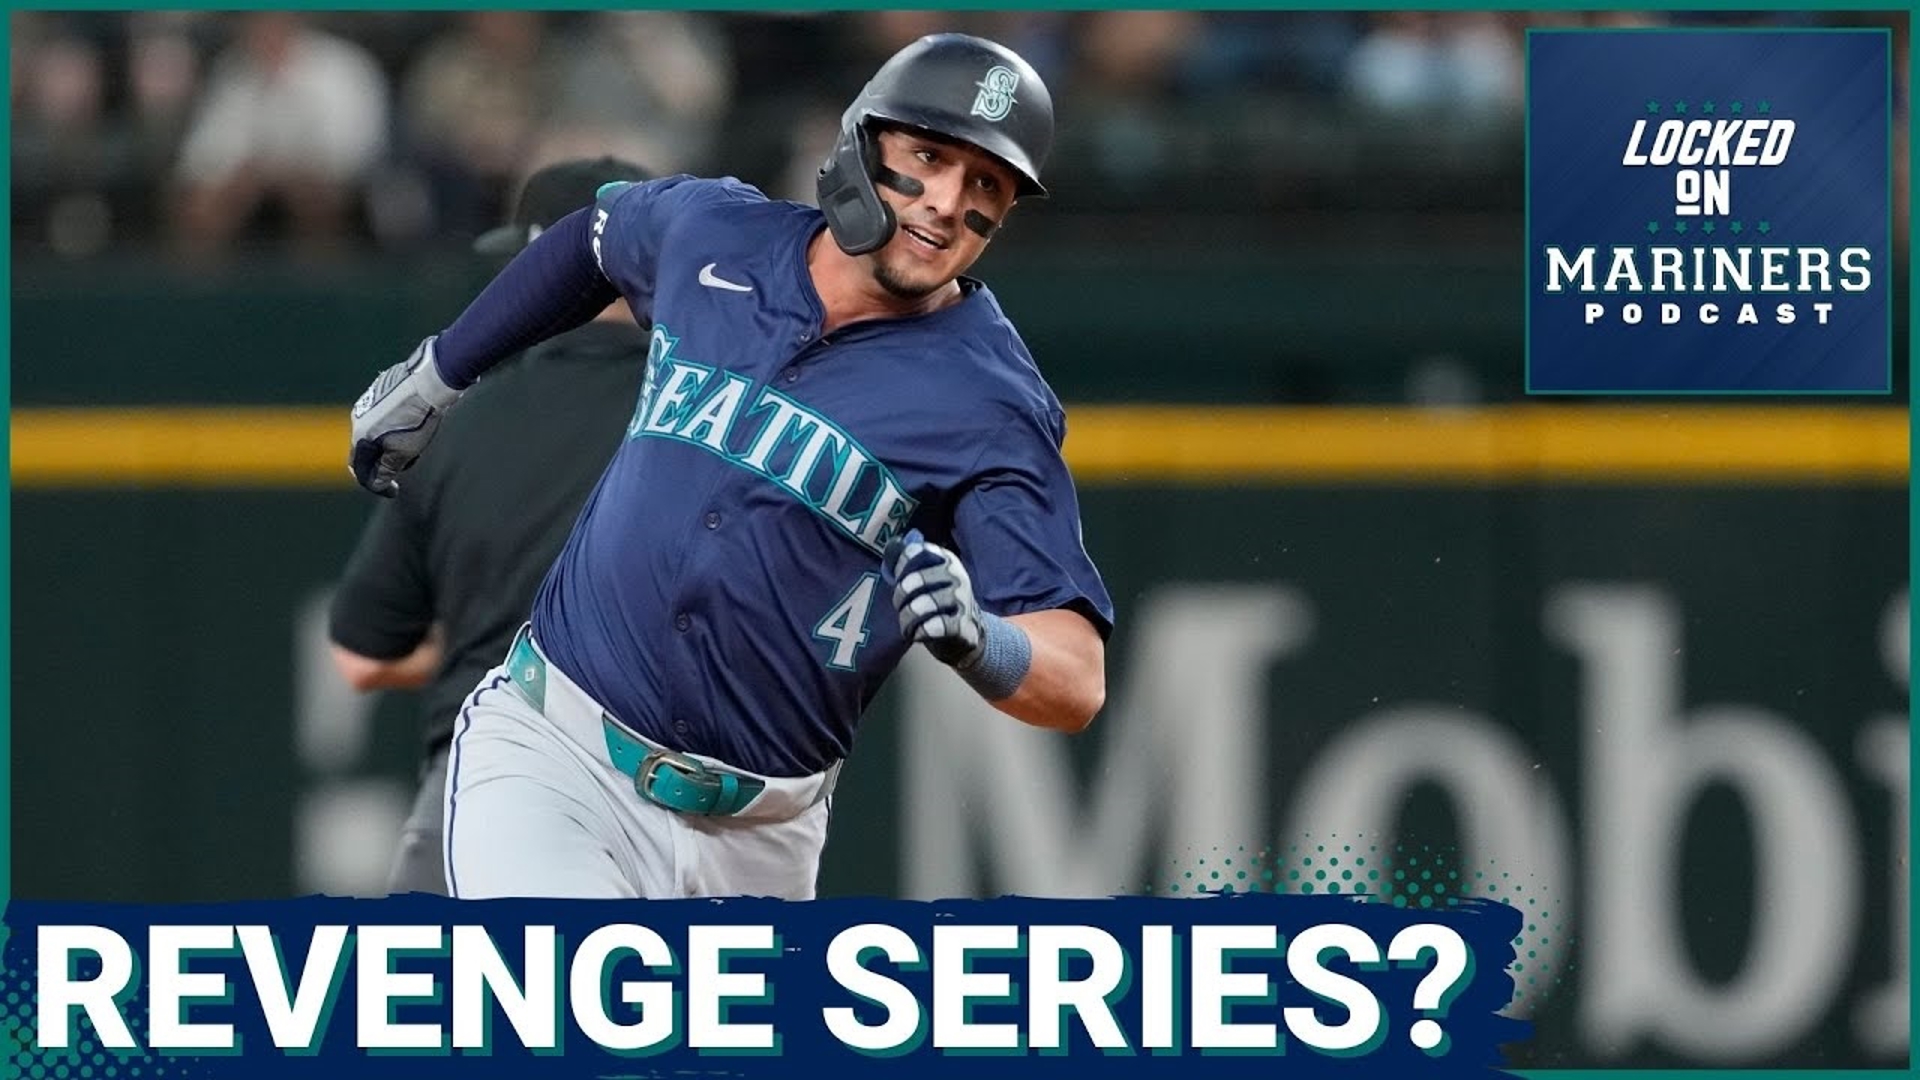 Fresh off a 4-2 road trip, the Mariners back home for a highly difficult homestand, starting with the defending National League champion Diamondbacks.